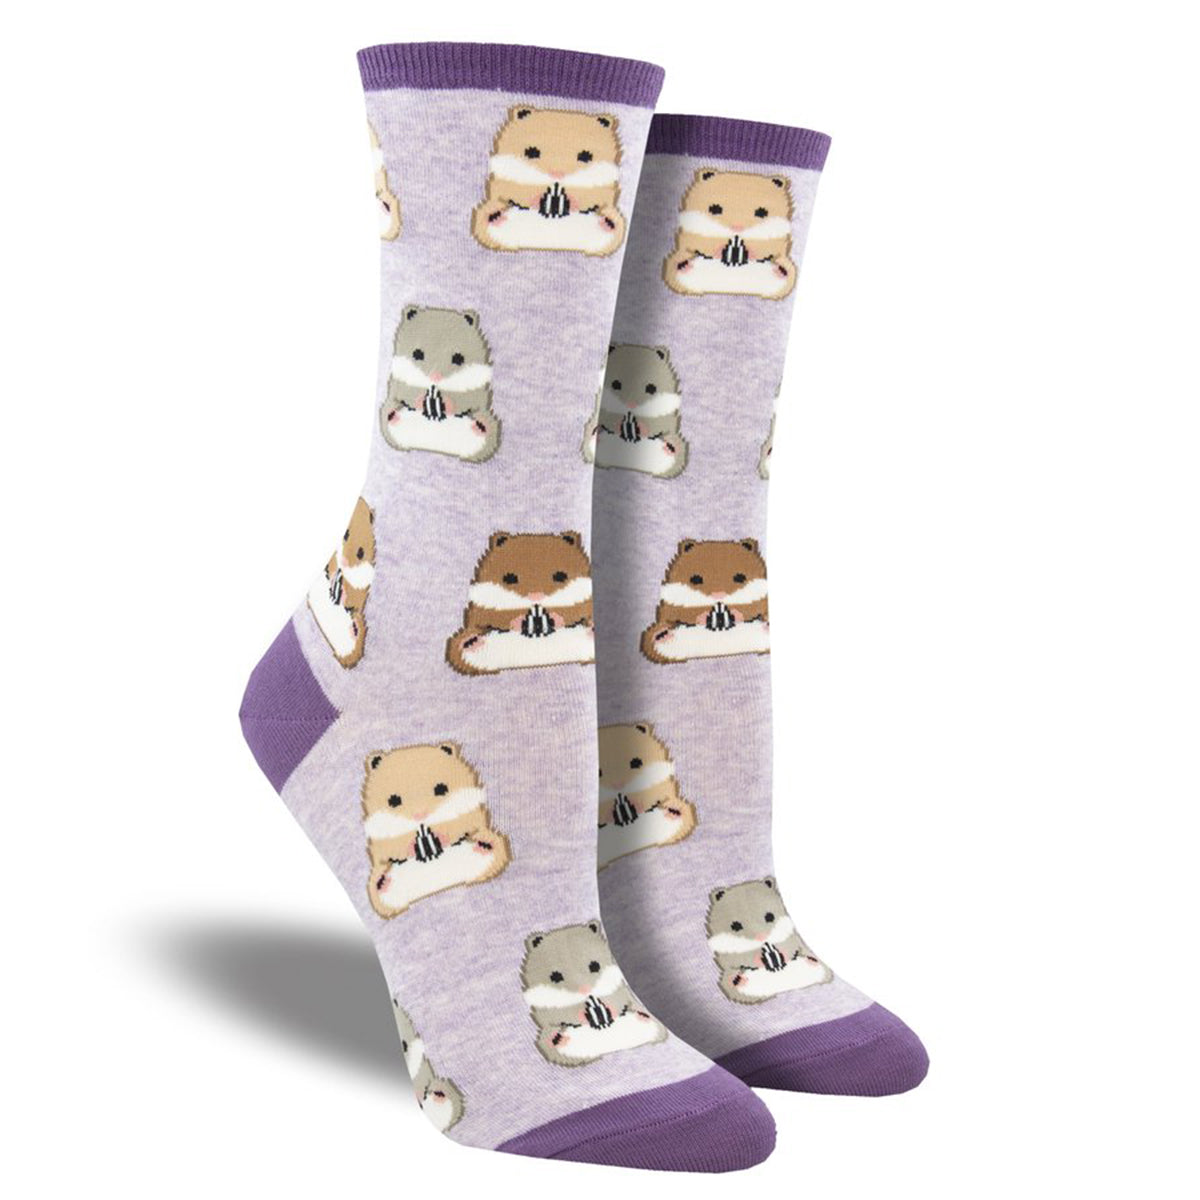 A pair of Socksmith SOCKSMITH GOING HAM CREW SOCK PURPLE socks featuring a repeated pattern of cartoon otters holding clams, perfect for women’s shoe size 5-10.5.